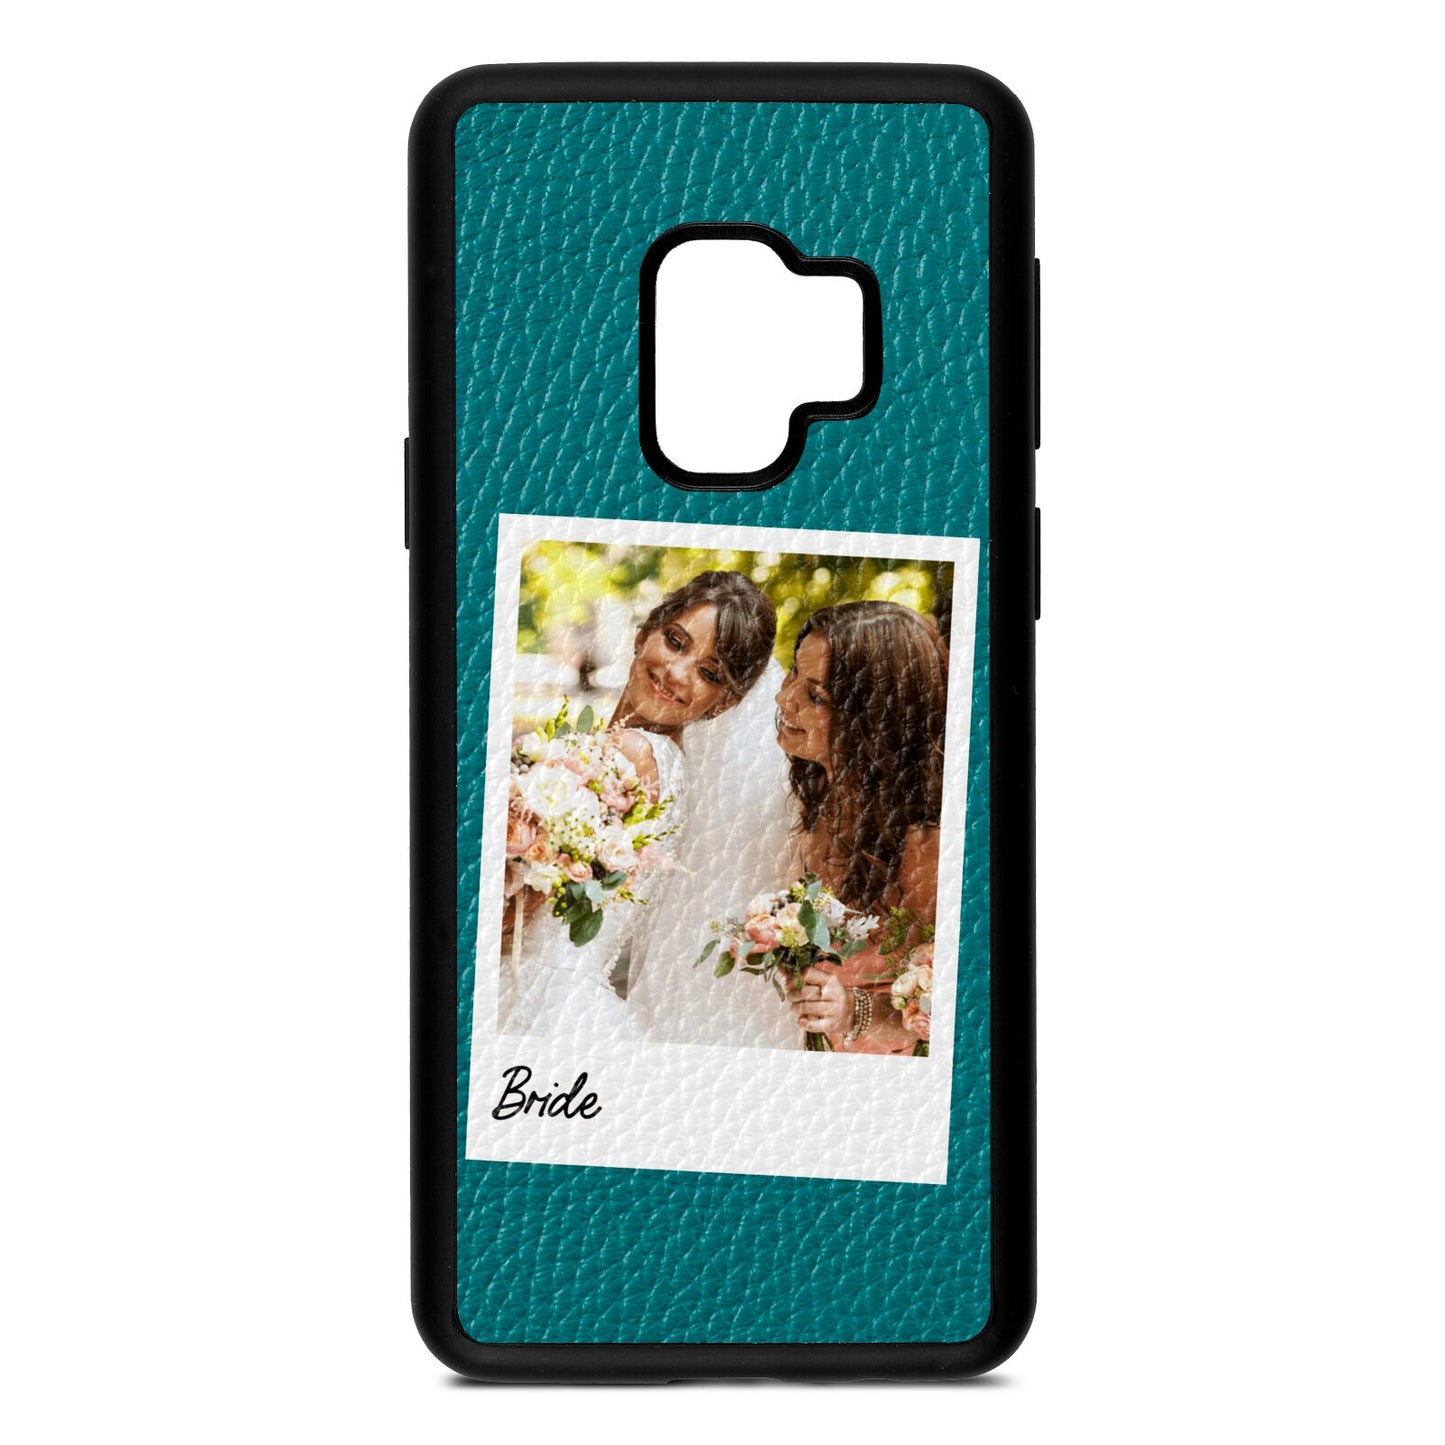 Bridal Photo Green Pebble Leather Samsung S9 Case